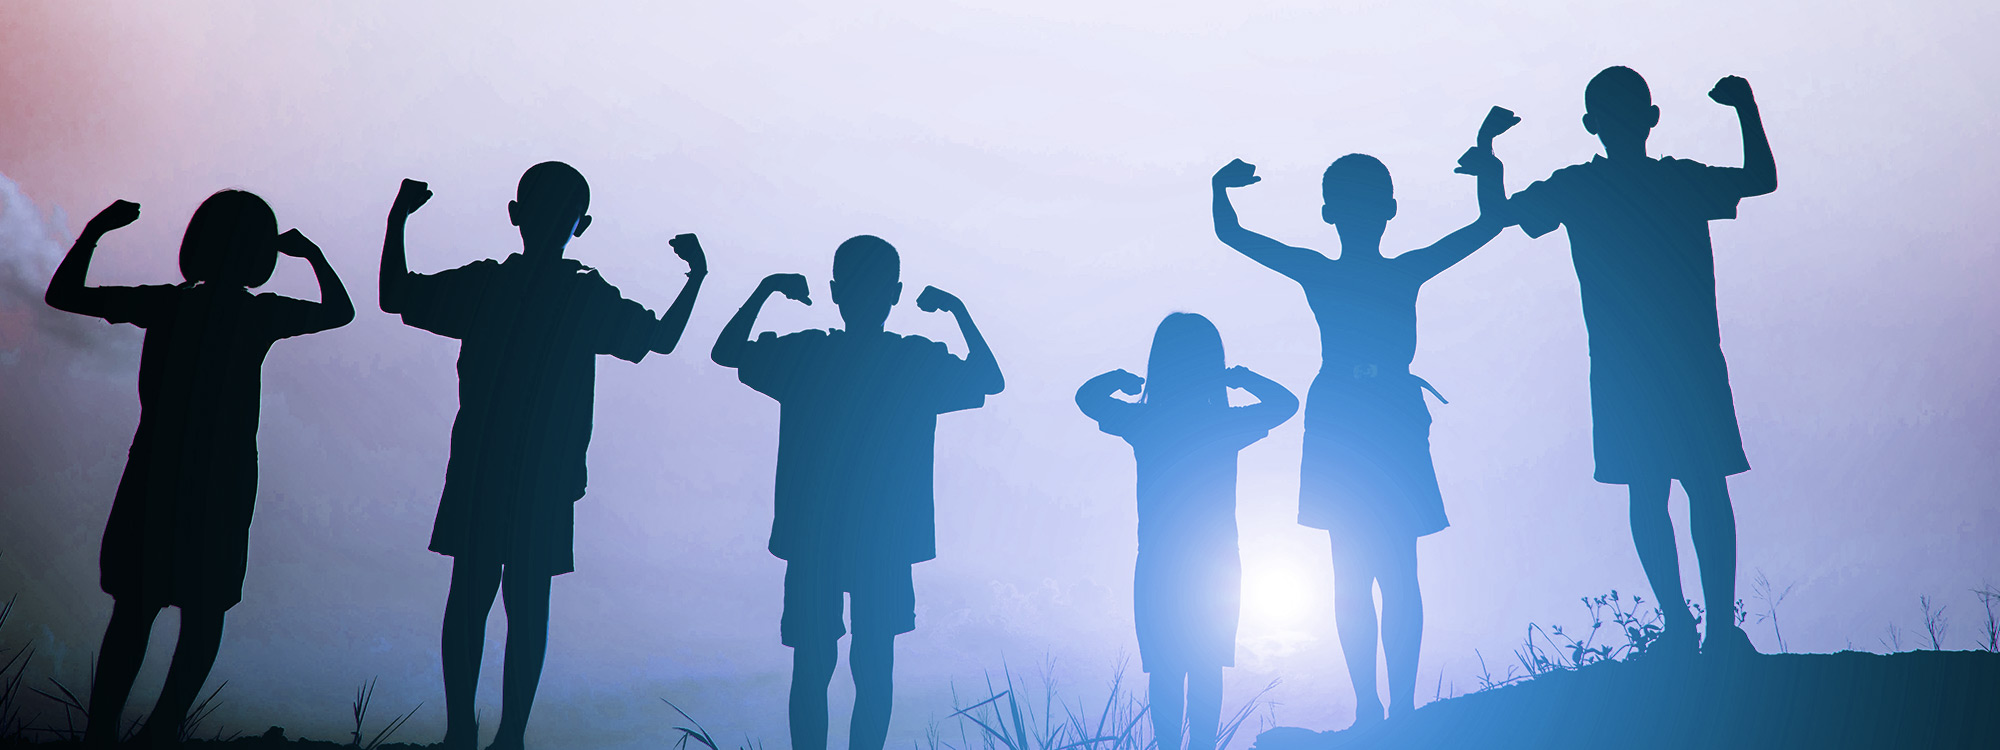 A group of children in silhouette making a flexing pose